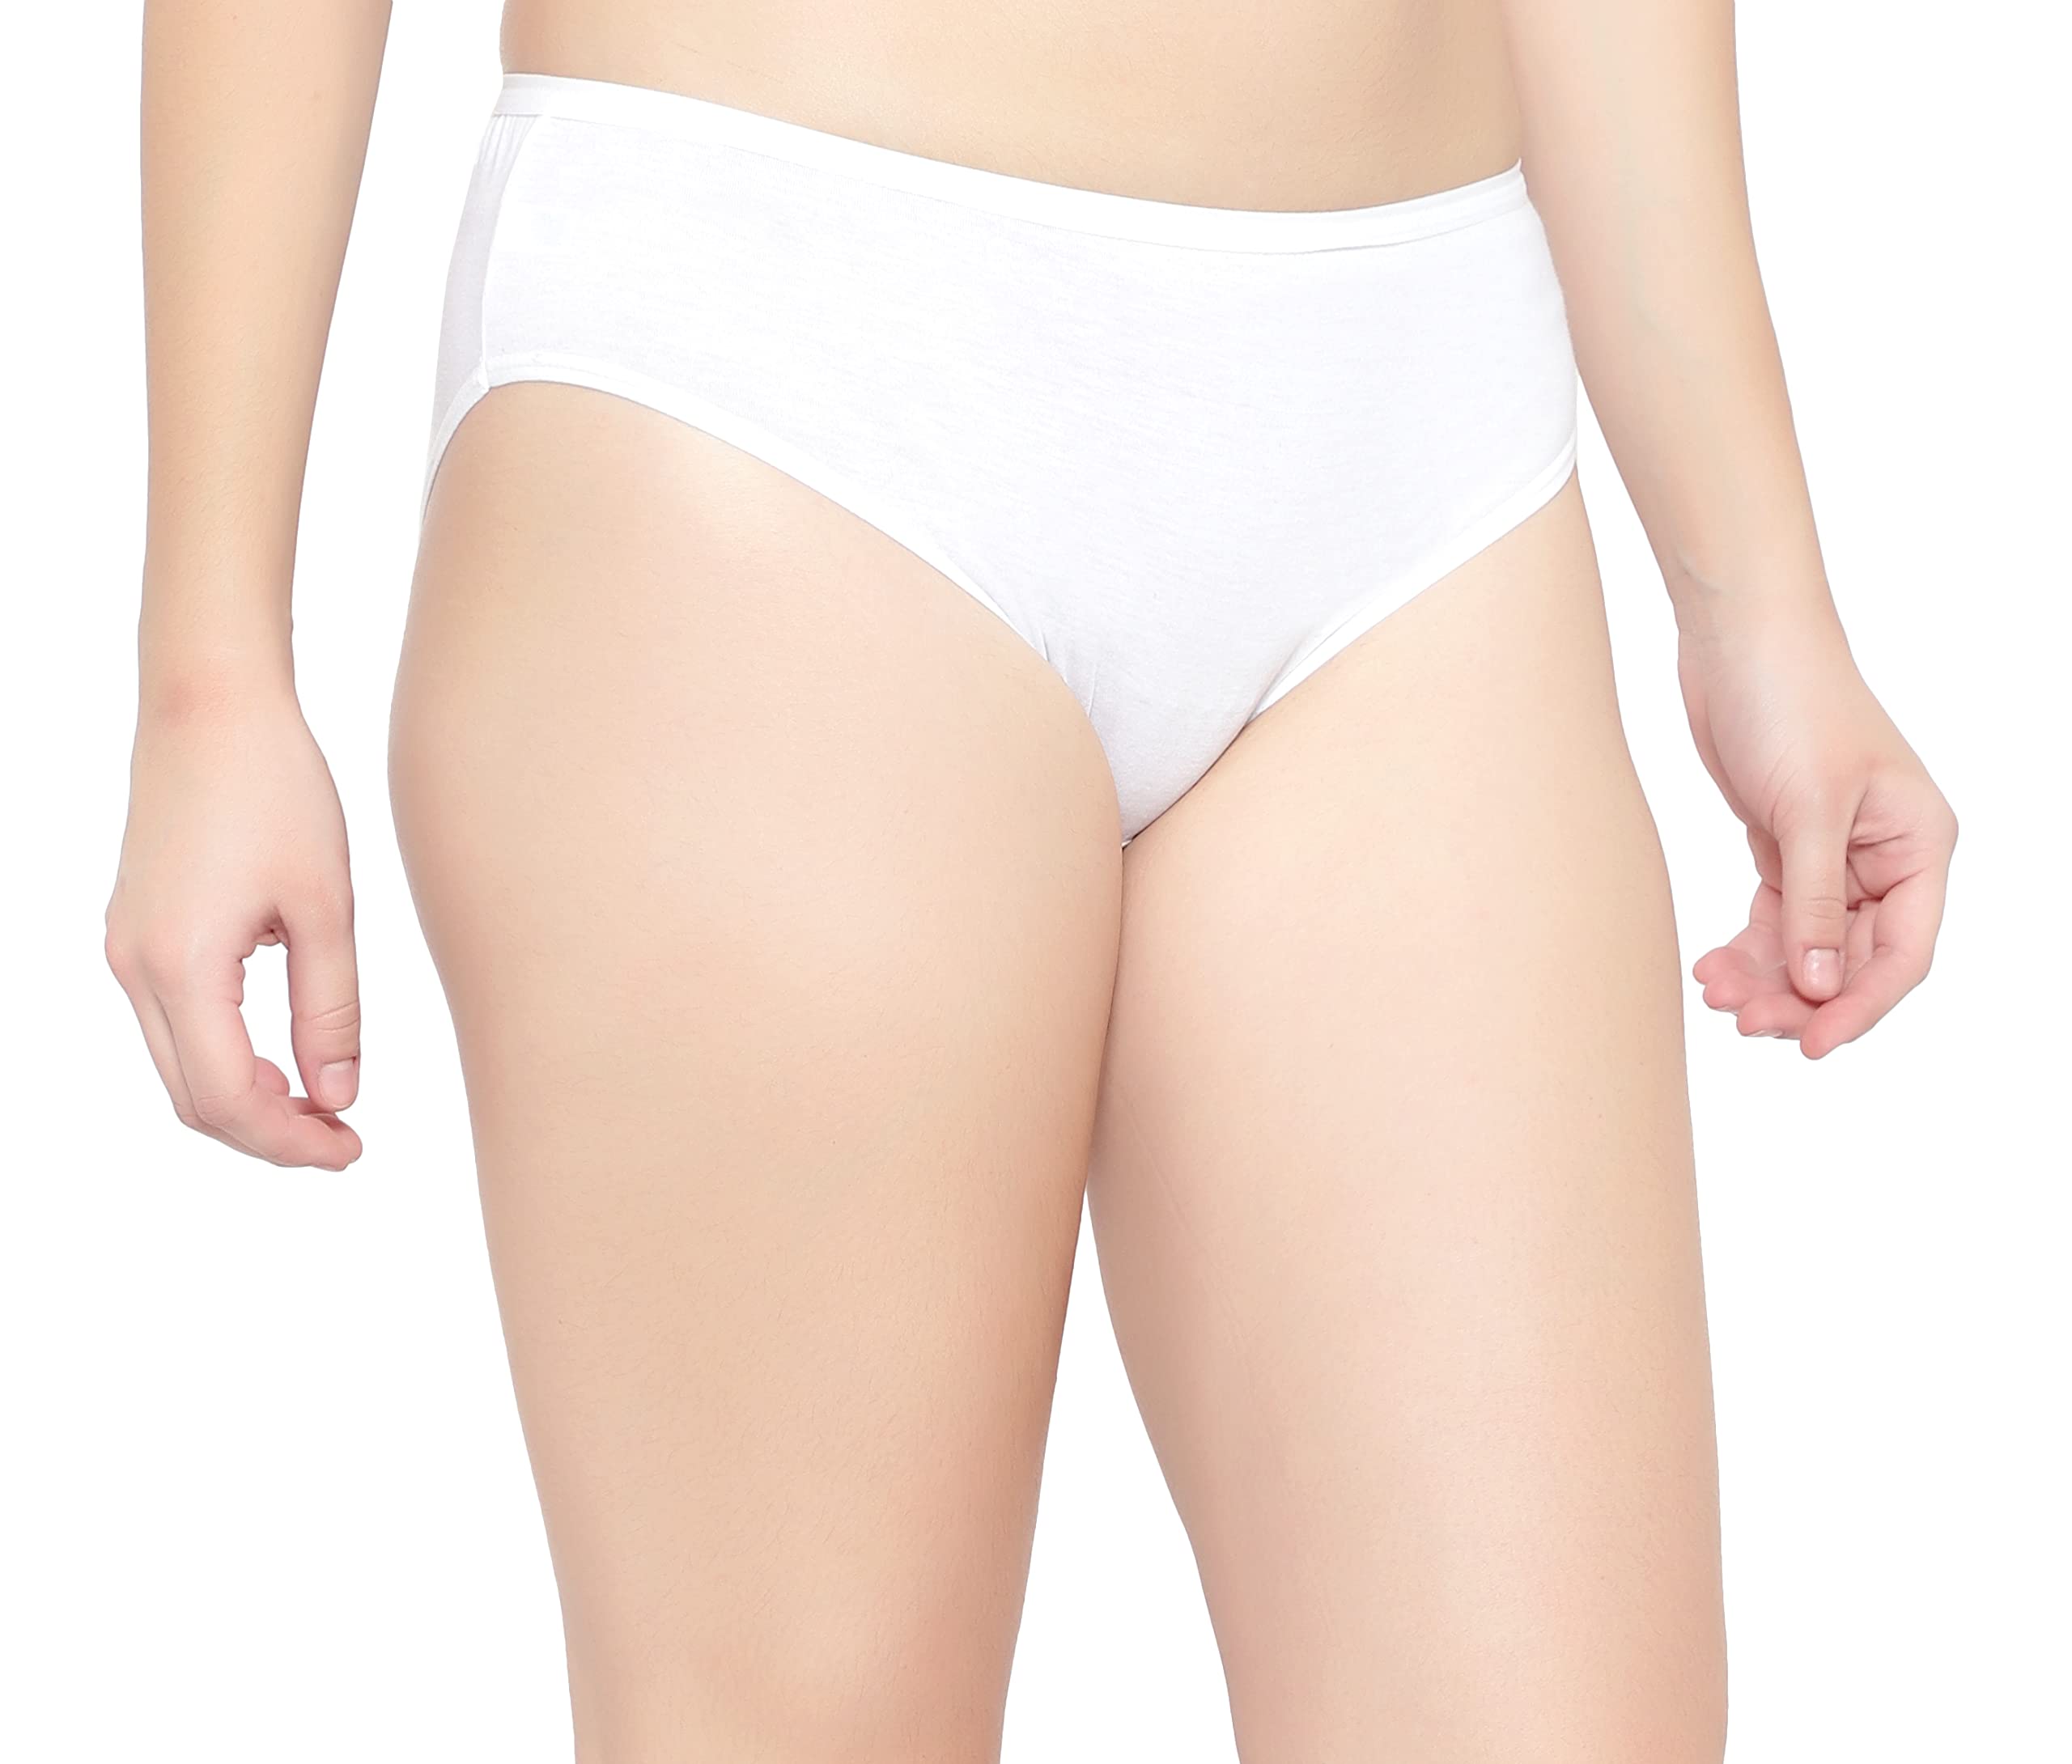 BLAZON Premium Women's and Girls Super Soft Cotton Hoisery Plain Mid Rise Hipster (Outer-Elastic) Panty |Combo Pack| Available Sizes: (S, M, L, XL, 2XL, 3XL, 4XL, 5XL) - White